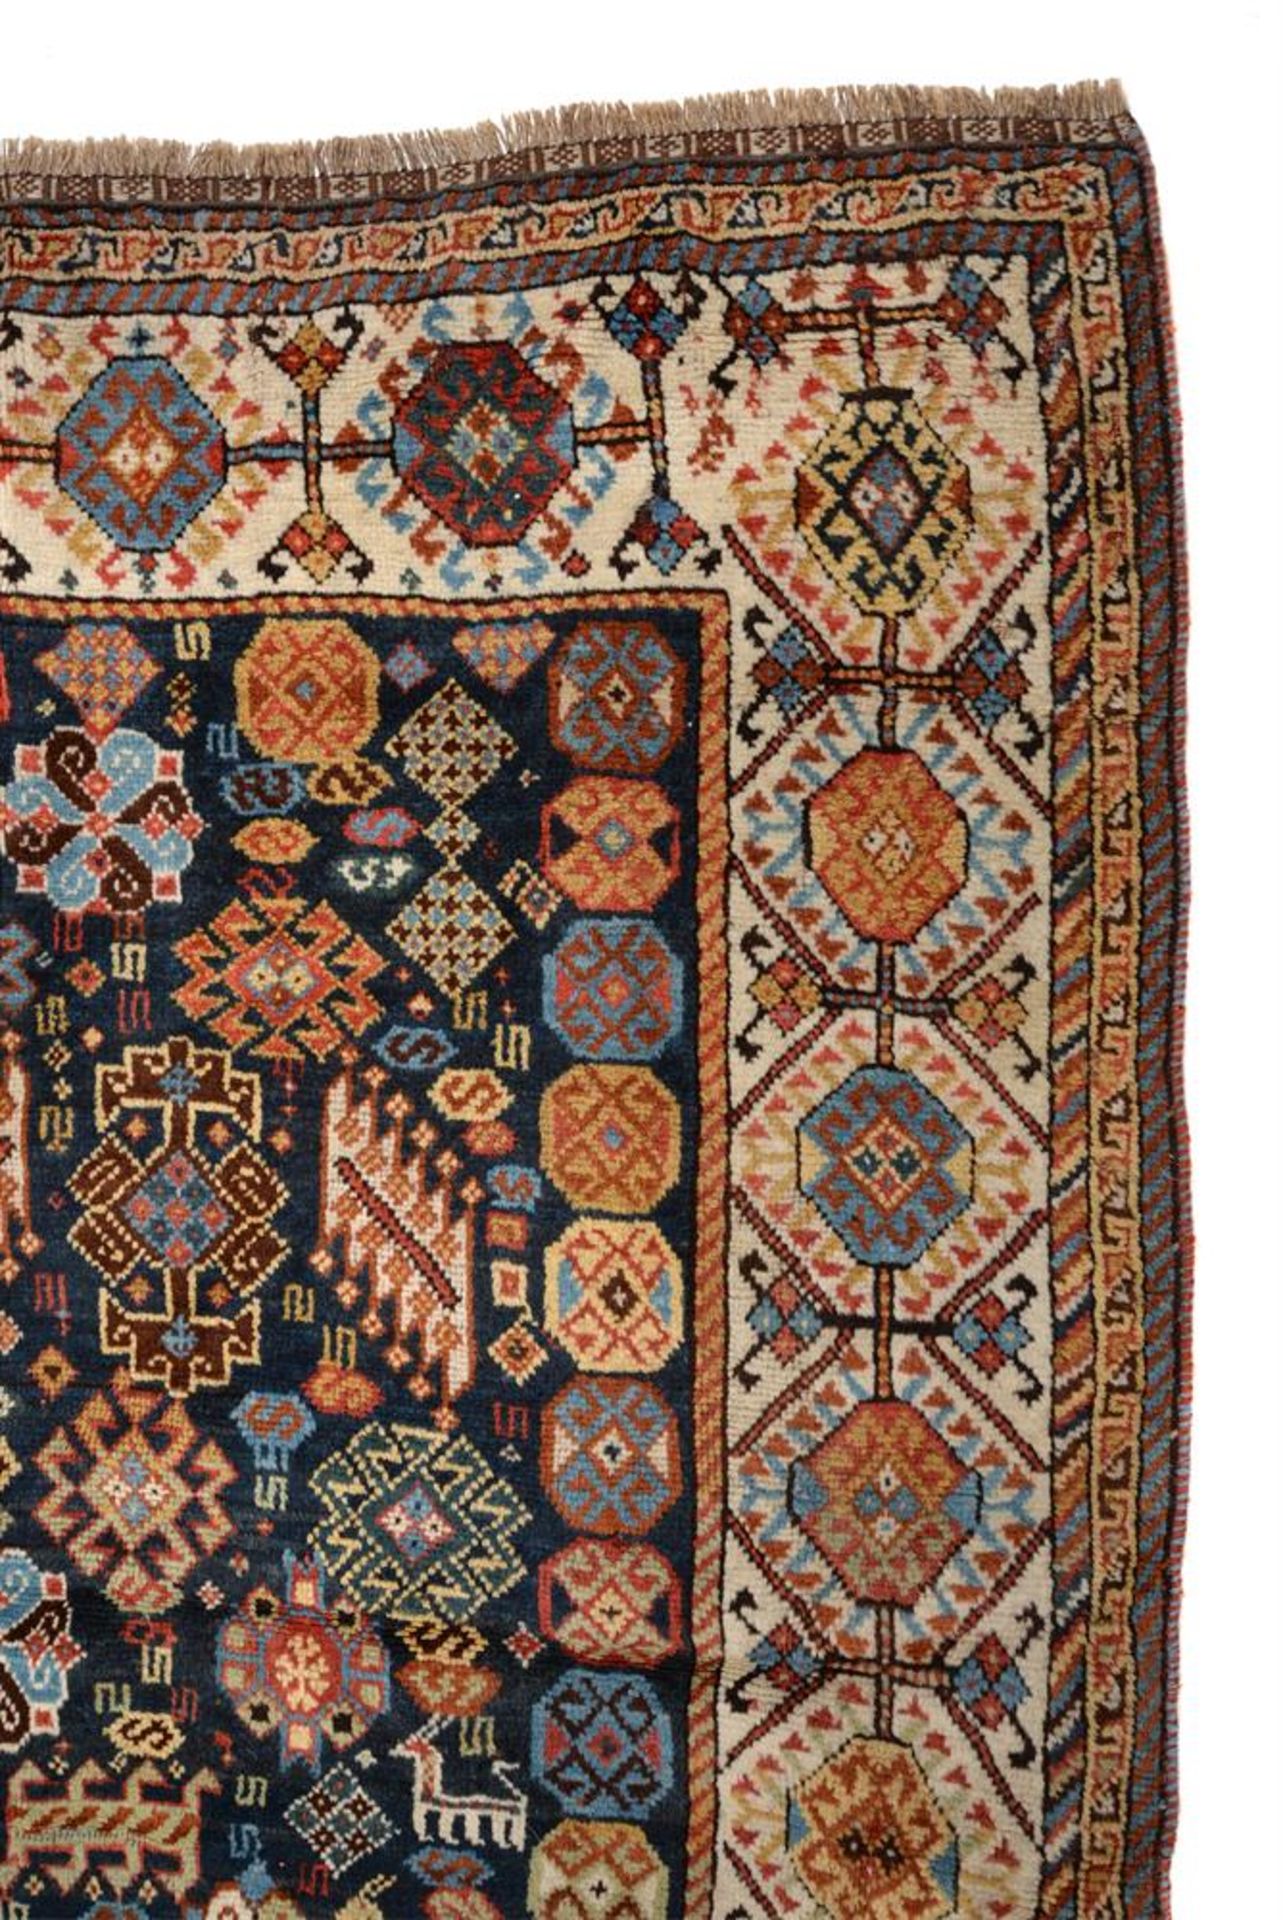 A QASHQAI RUG, approximately 220 x 152cm - Image 3 of 3